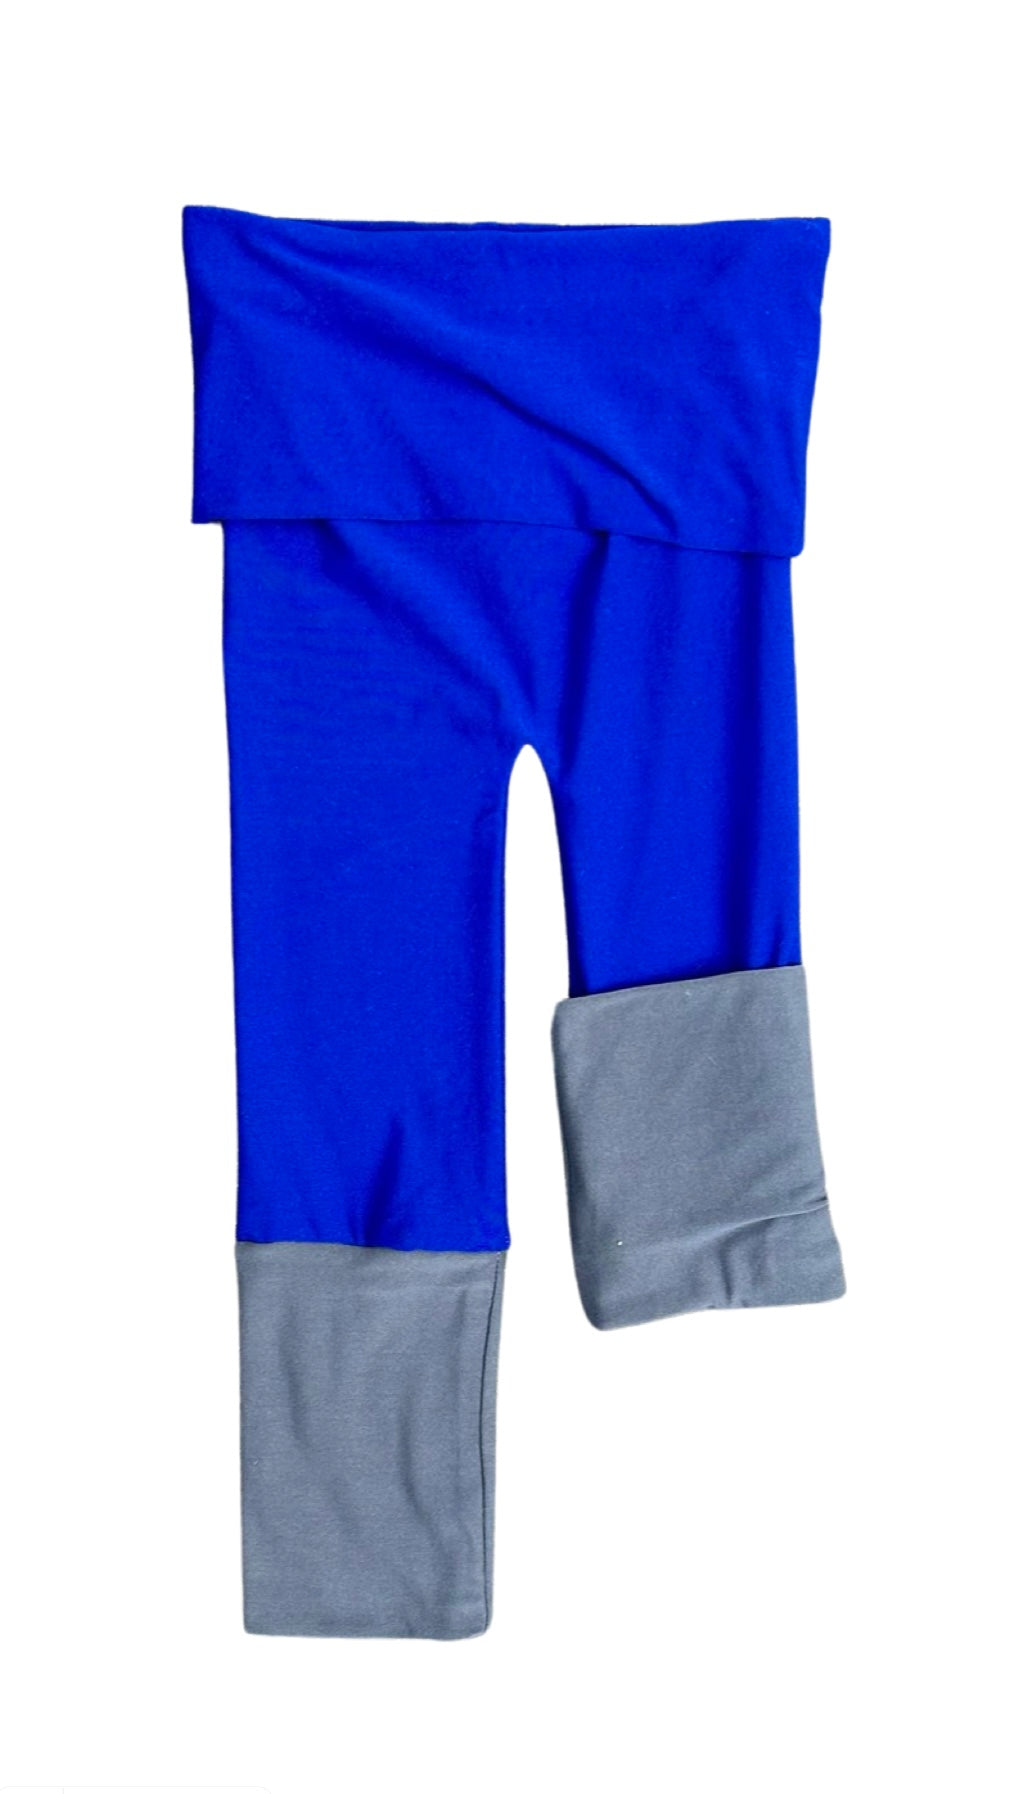 Adjustable Pants - Blue with Blue and Gray